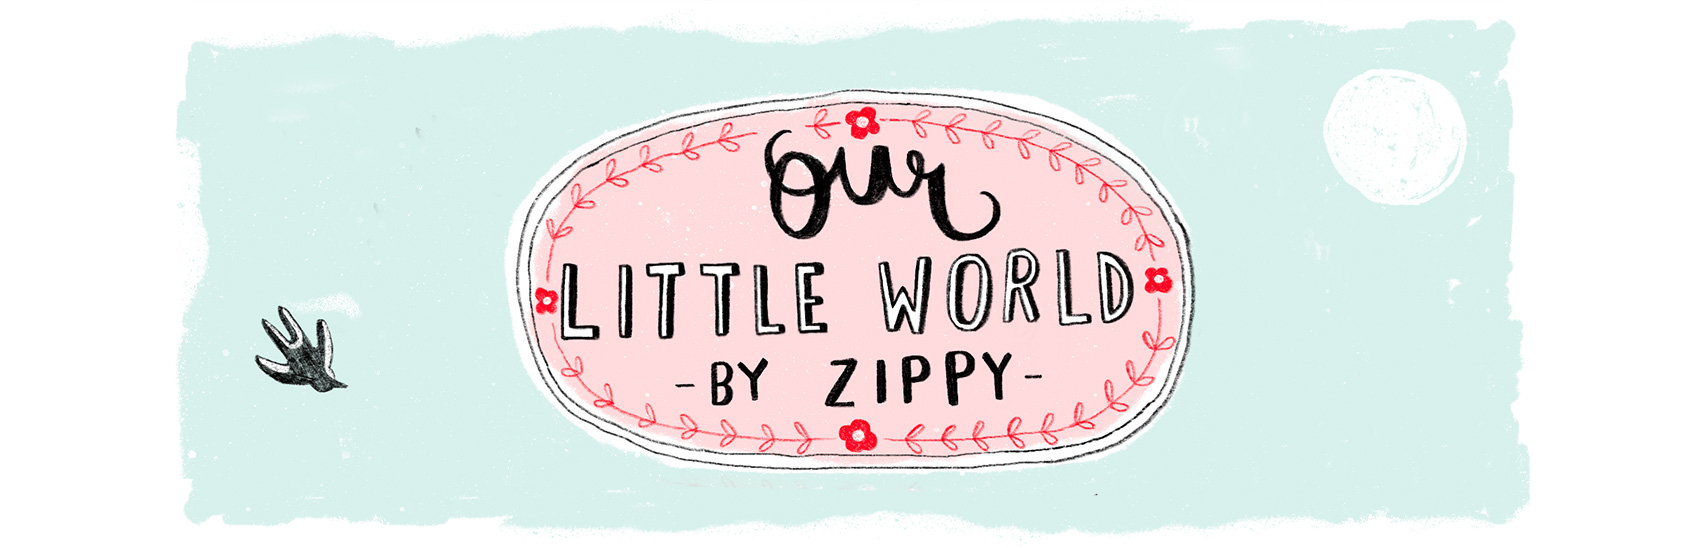 Our Little World | Zippy Online Portugal